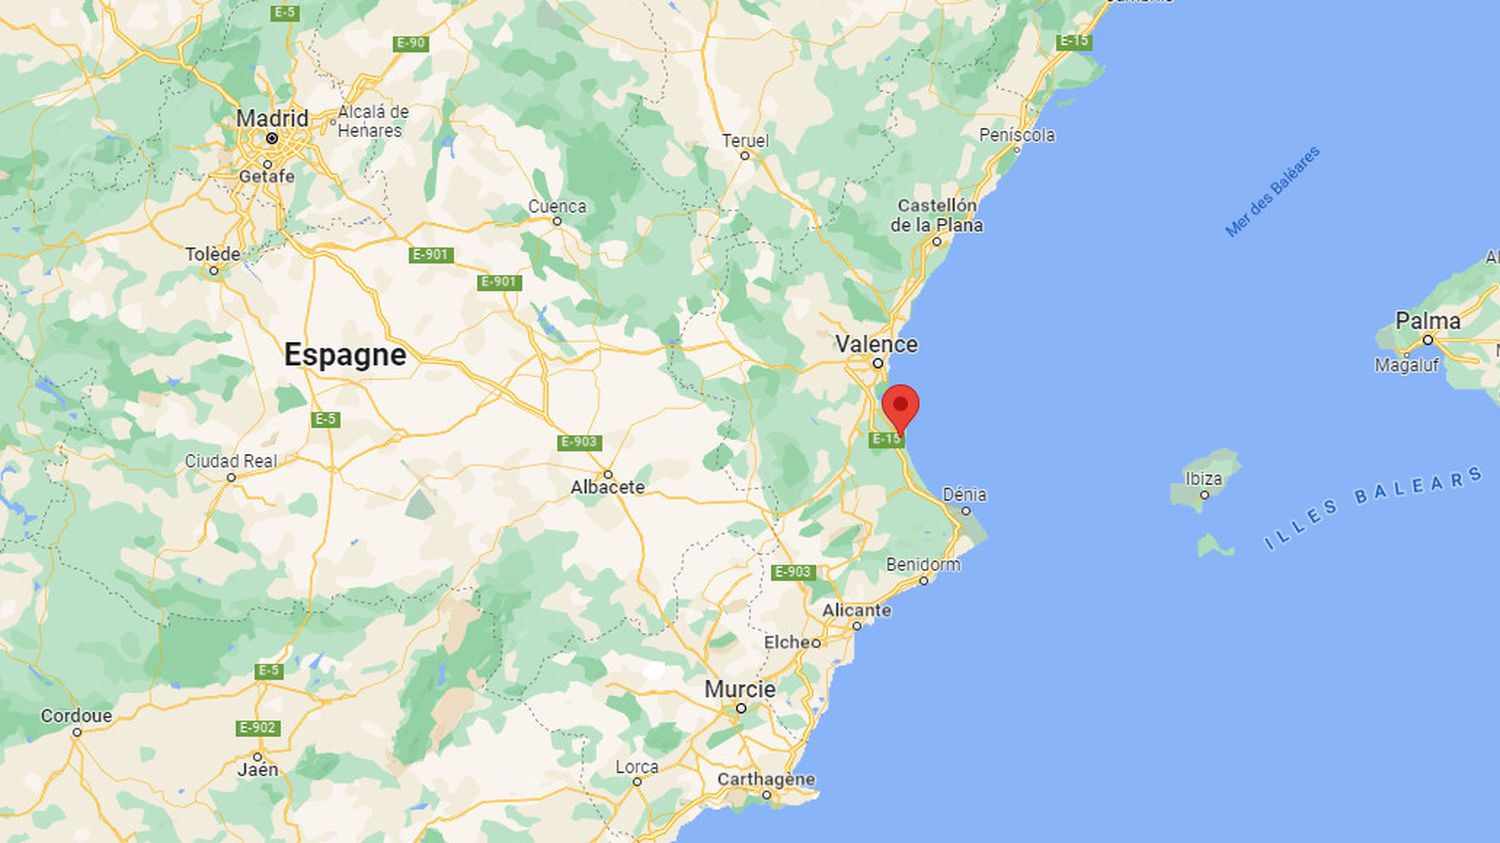 Spain: one dead and dozens injured after a gust of wind at a music festival
